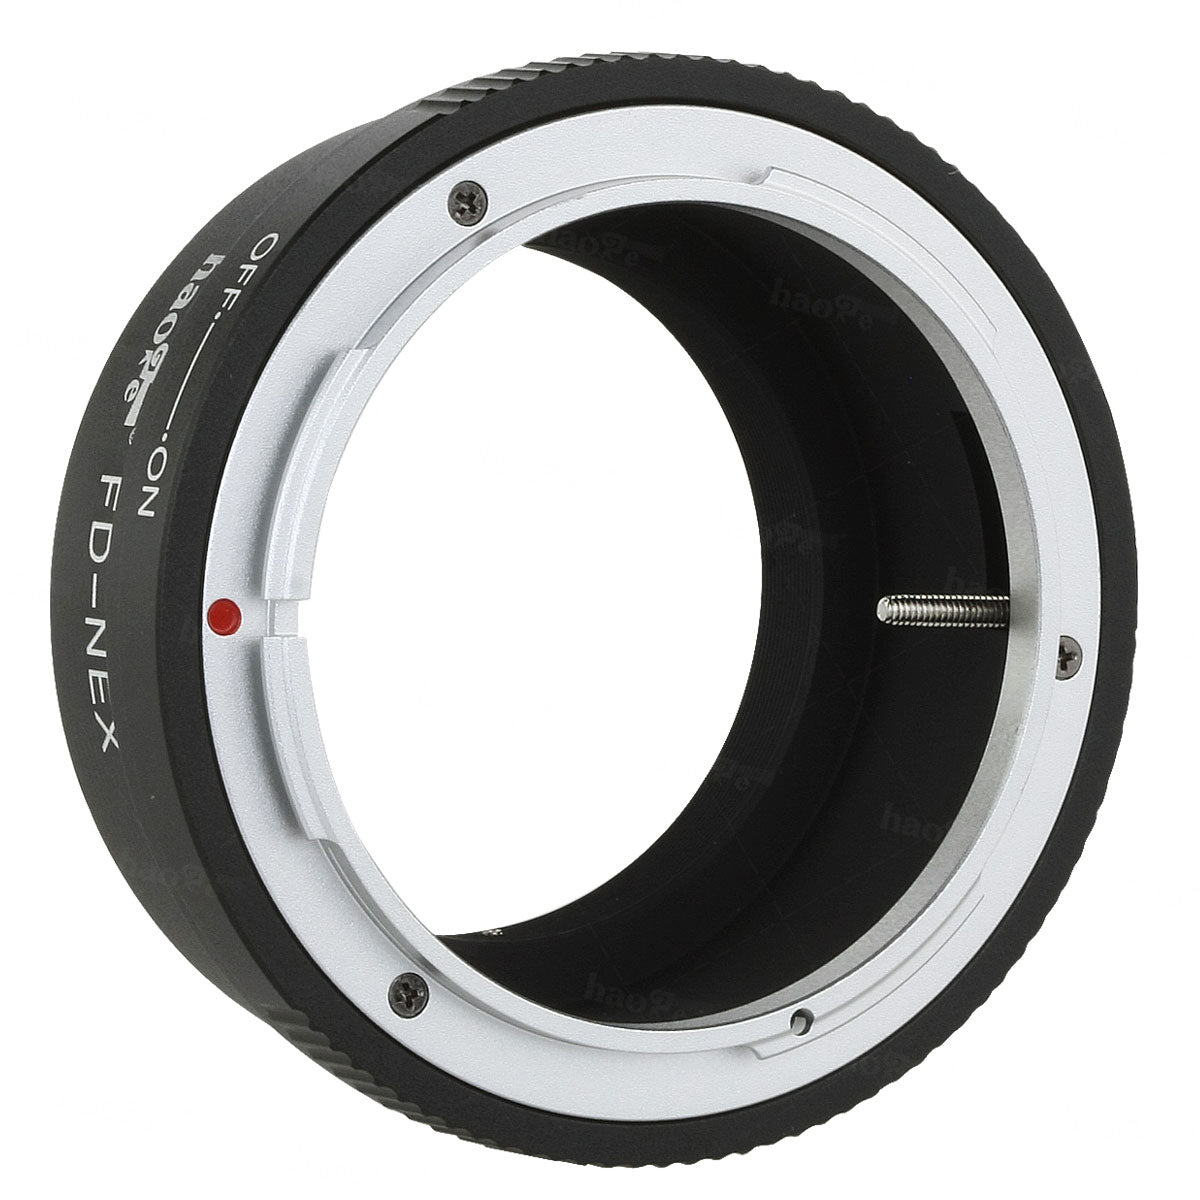 Haoge Lens Mount Adapter for Canon FD Mount Lens to Sony E-mount NEX Camera such as NEX-3, NEX-5, NEX-5N, NEX-7, NEX-7N, NEX-C3, NEX-F3, a6300, a6000, a5000, a3500, a3000, NEX-VG10, VG20